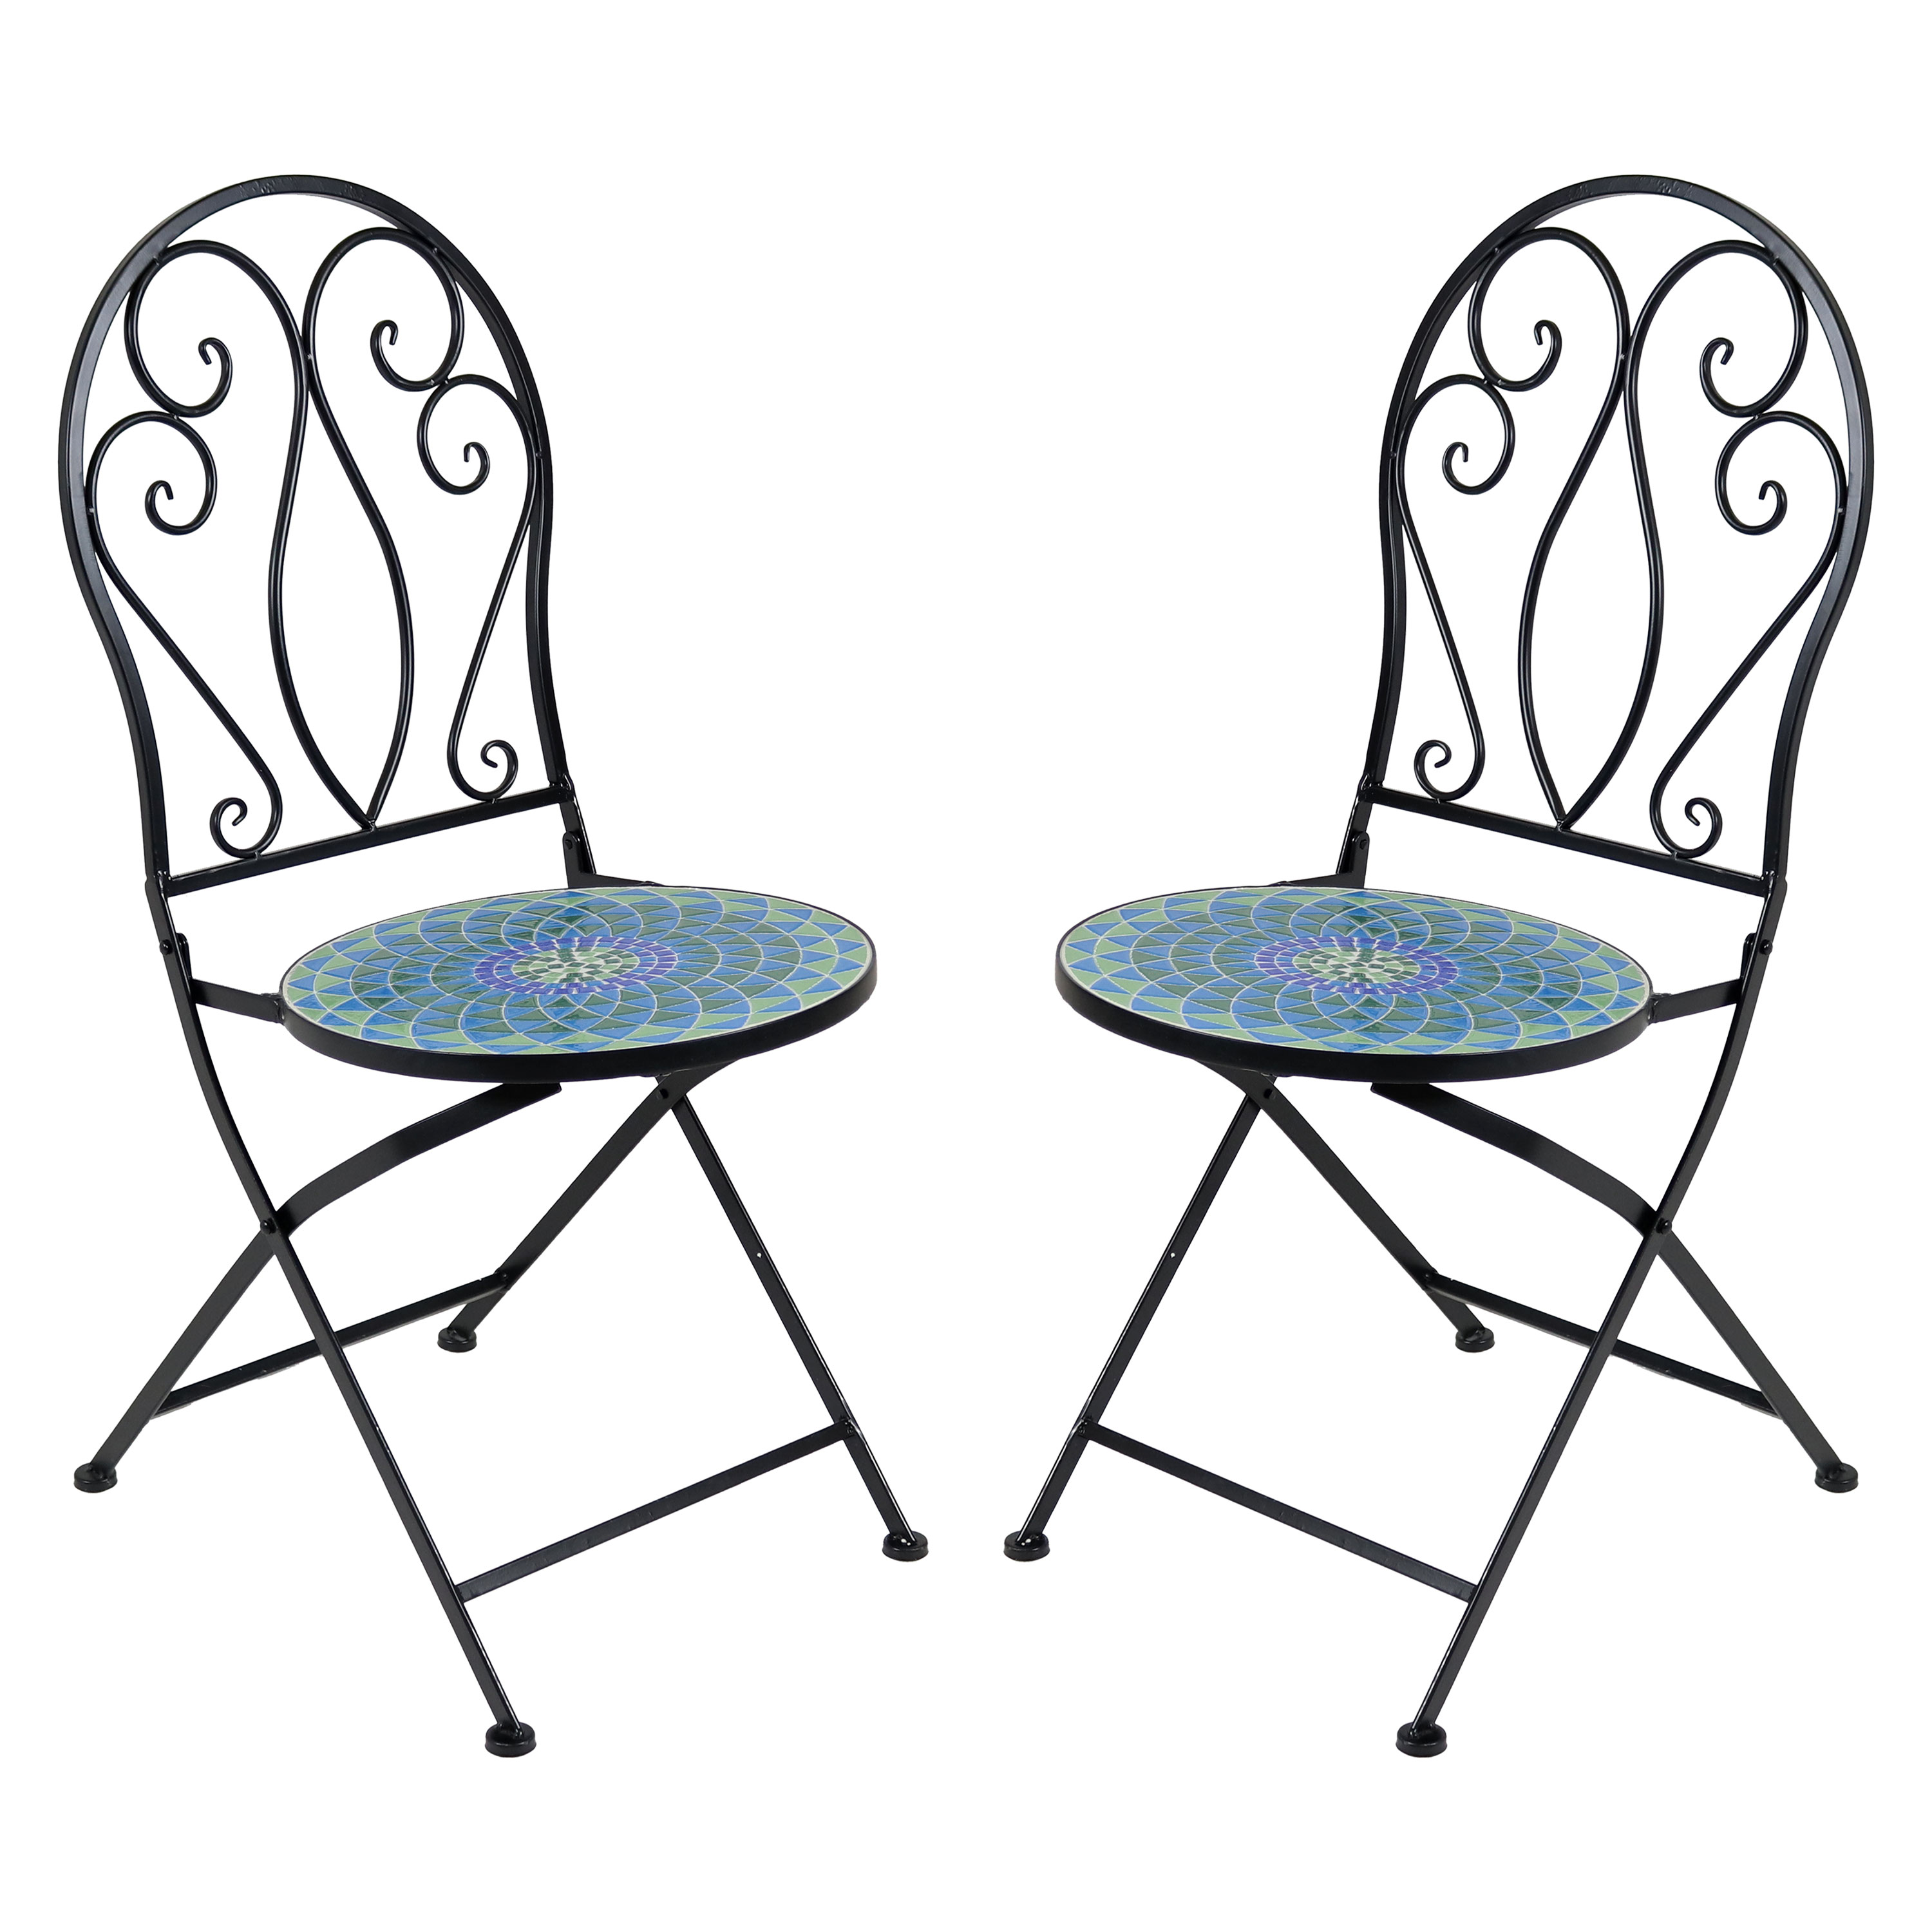 Mosaic Tile Bistro Chair with Iron Frame - 2-Pack